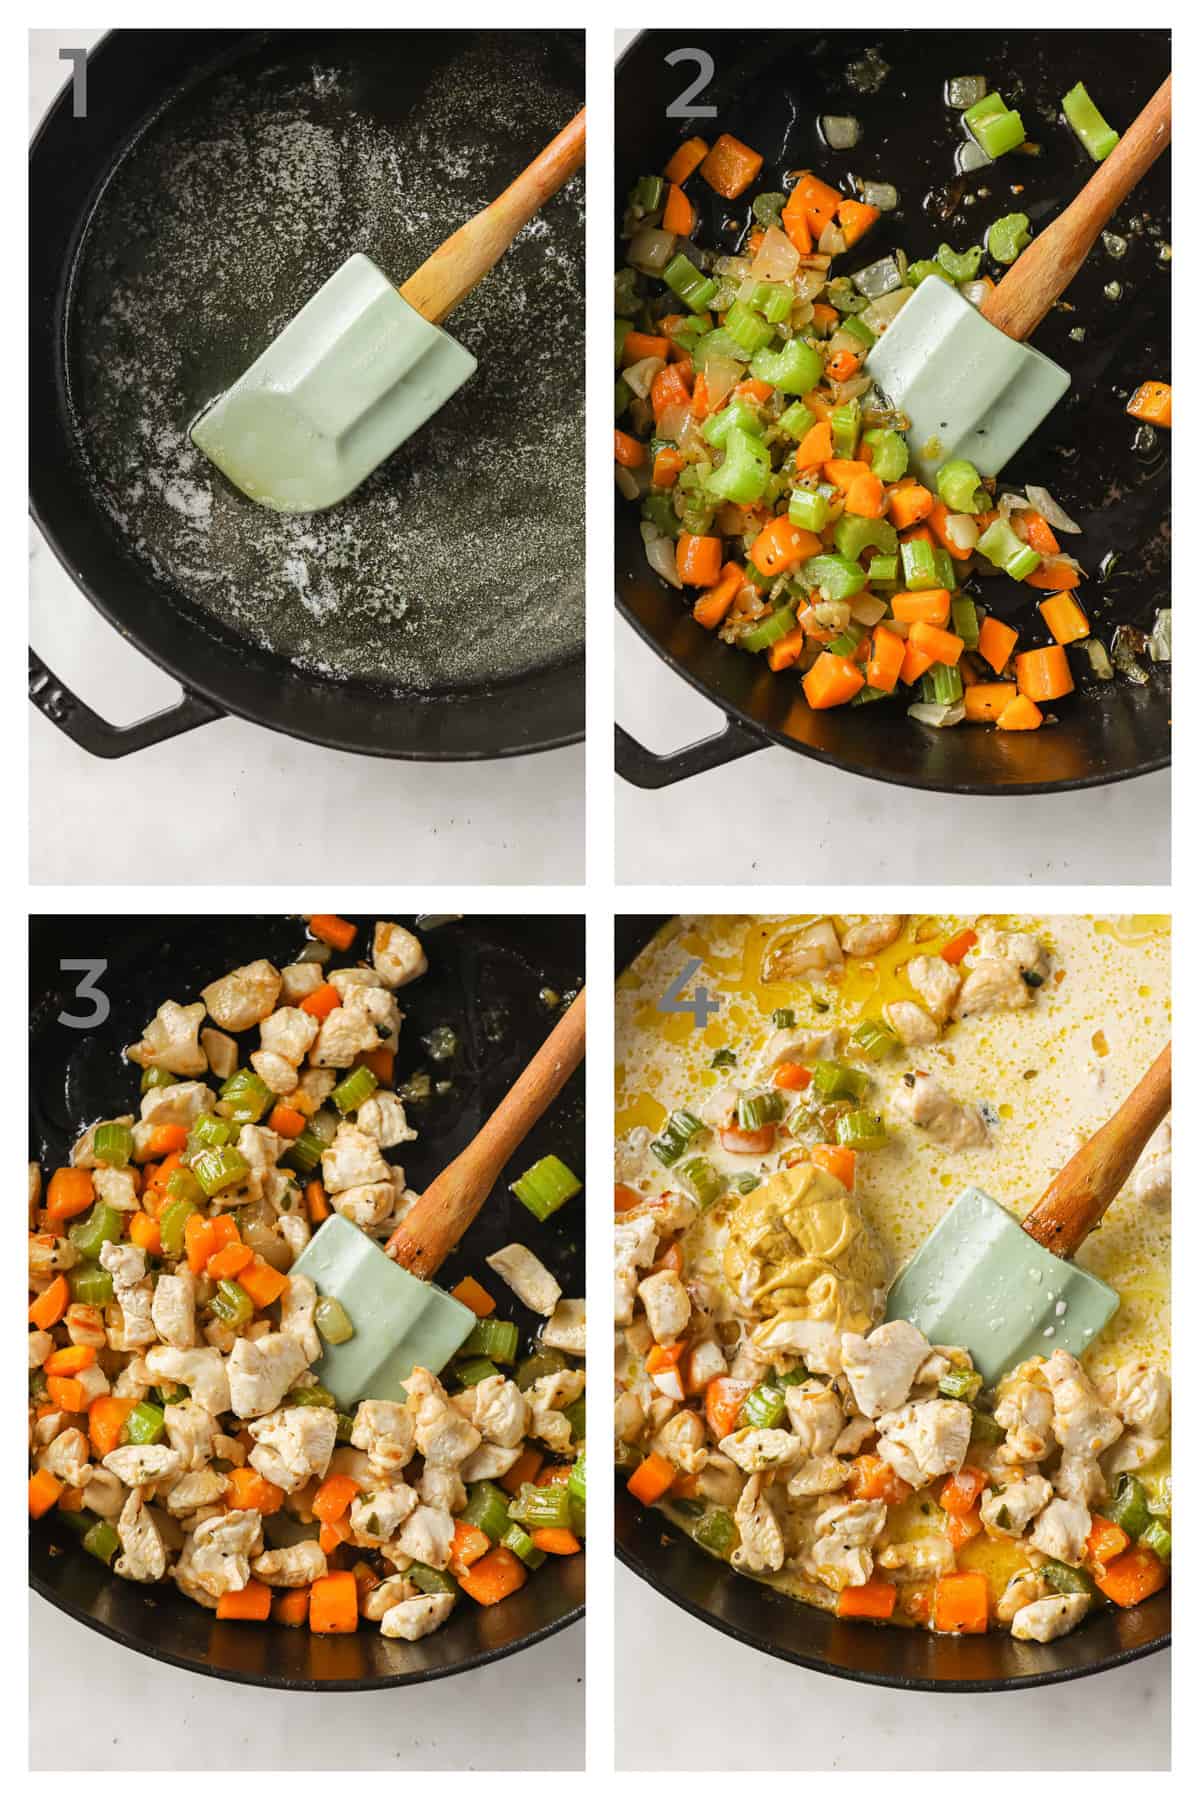 Step by step instructions on how to make the filling for chicken pot pie